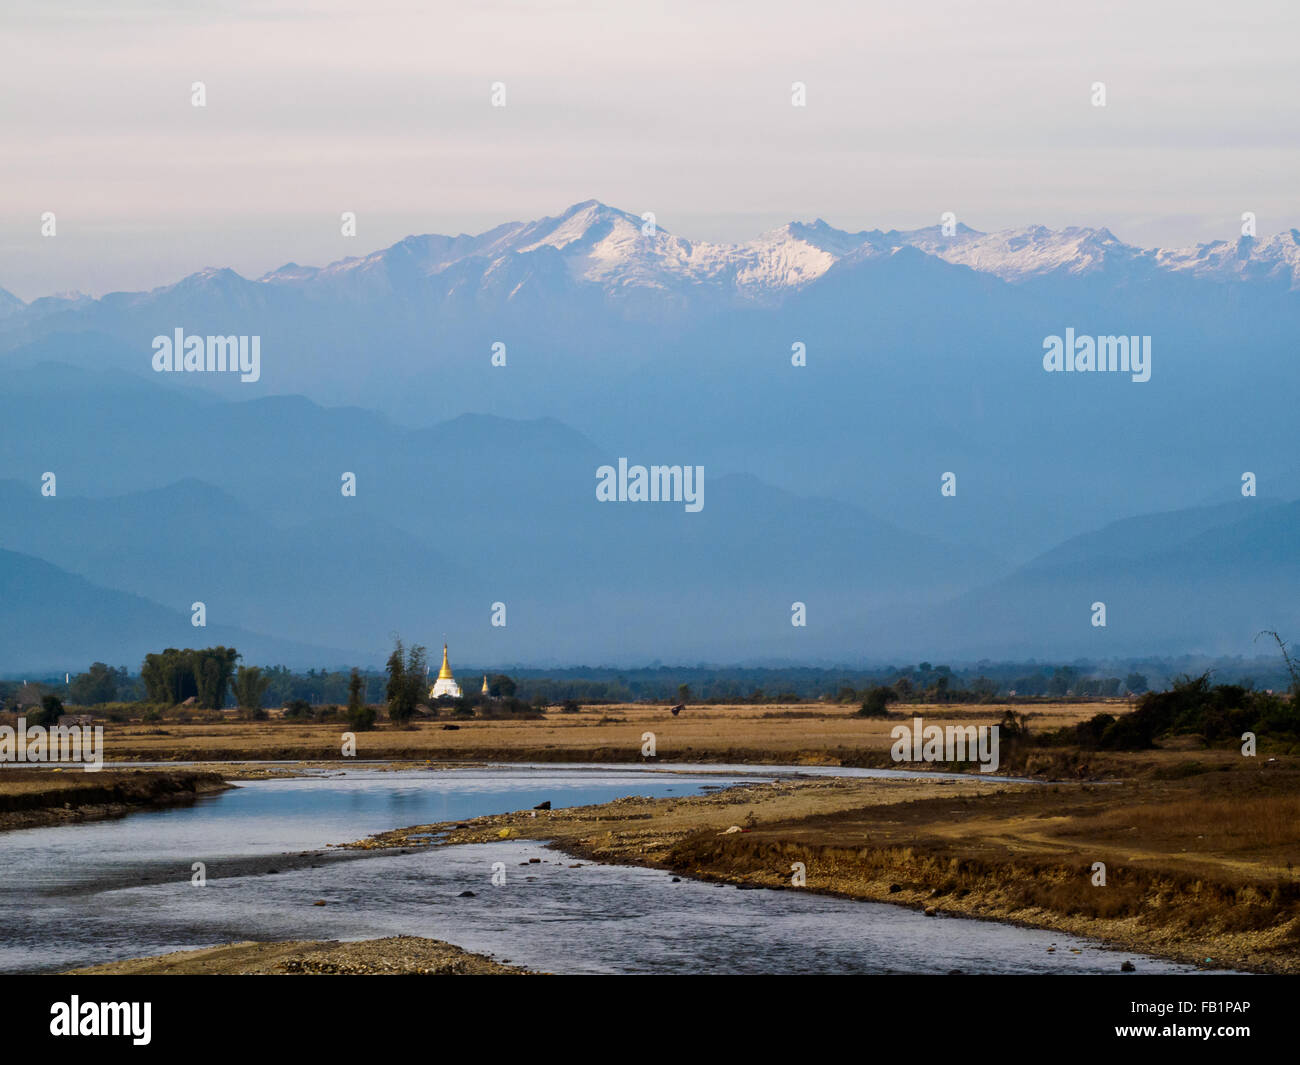 The picturesque scenery of Putao and its snow-capped mountains, northern Myanmar Stock Photo